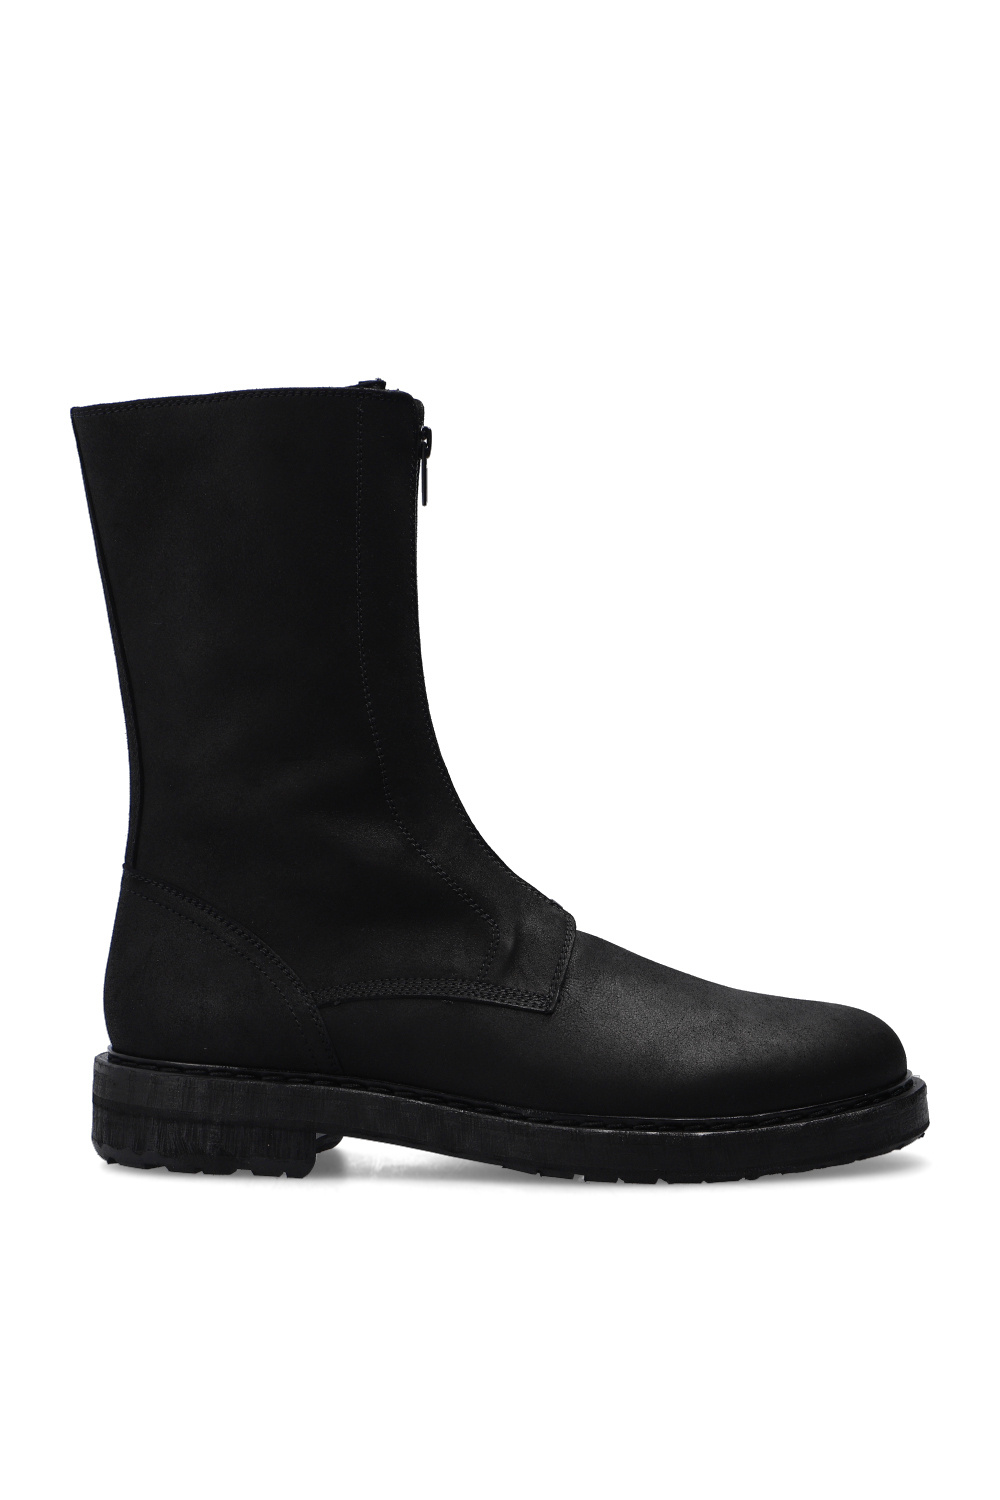 Black 'Willy' boots Ann Demeulemeester - Vitkac GB